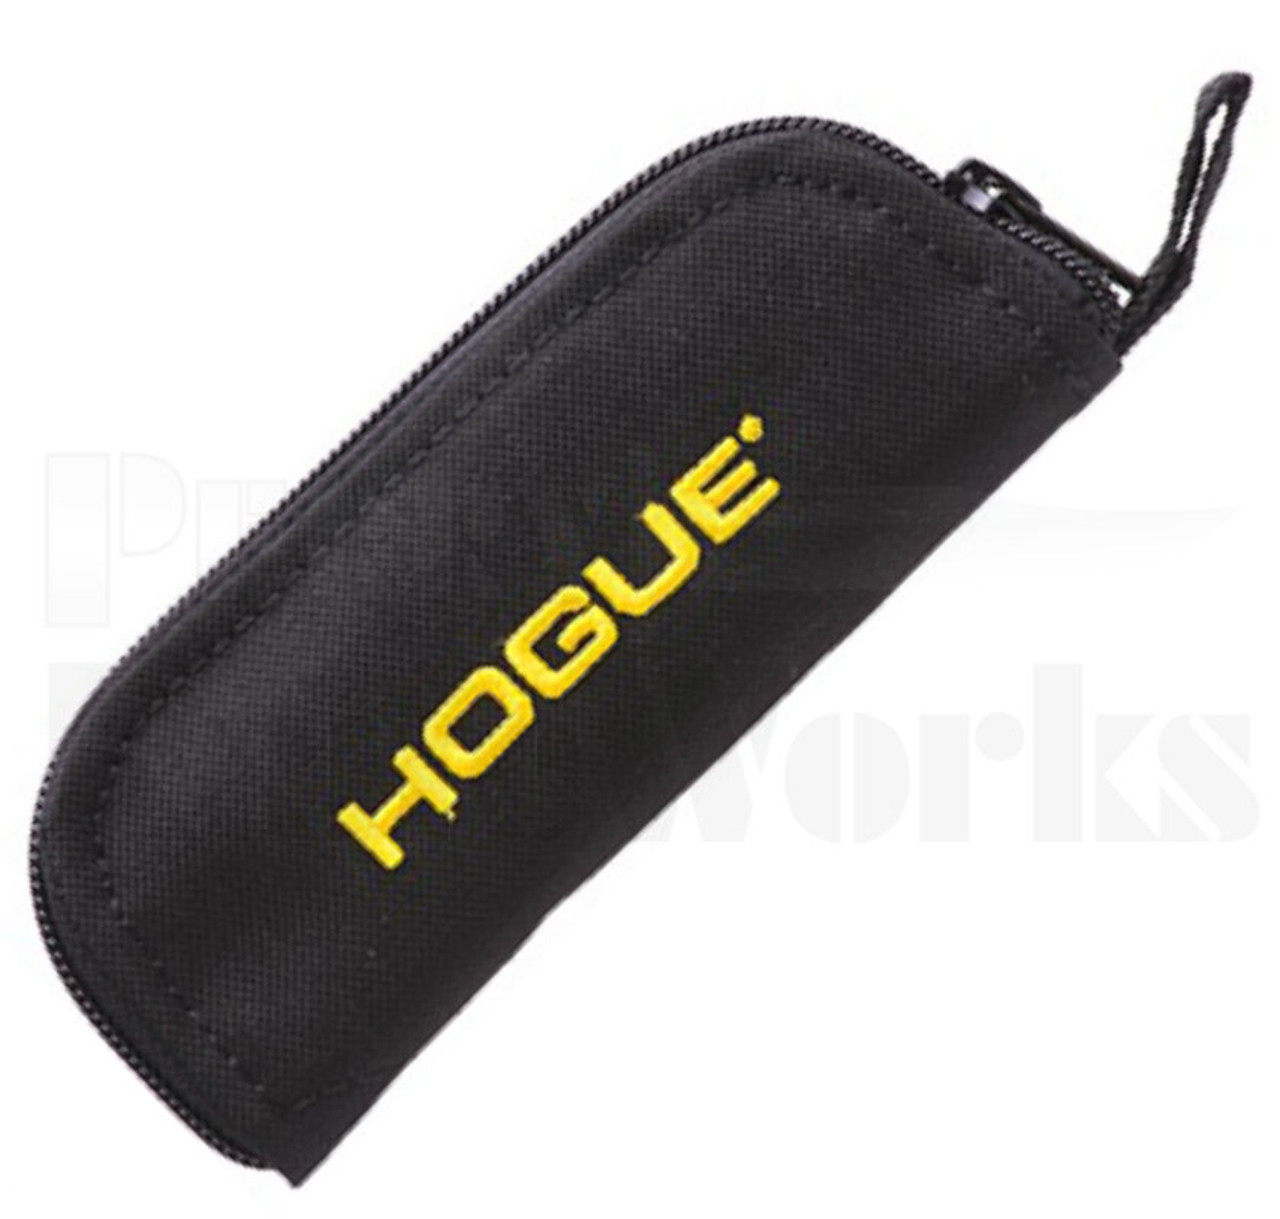 Hogue A01 Microswitch Automatic Knife Gray 24102 l Pouch